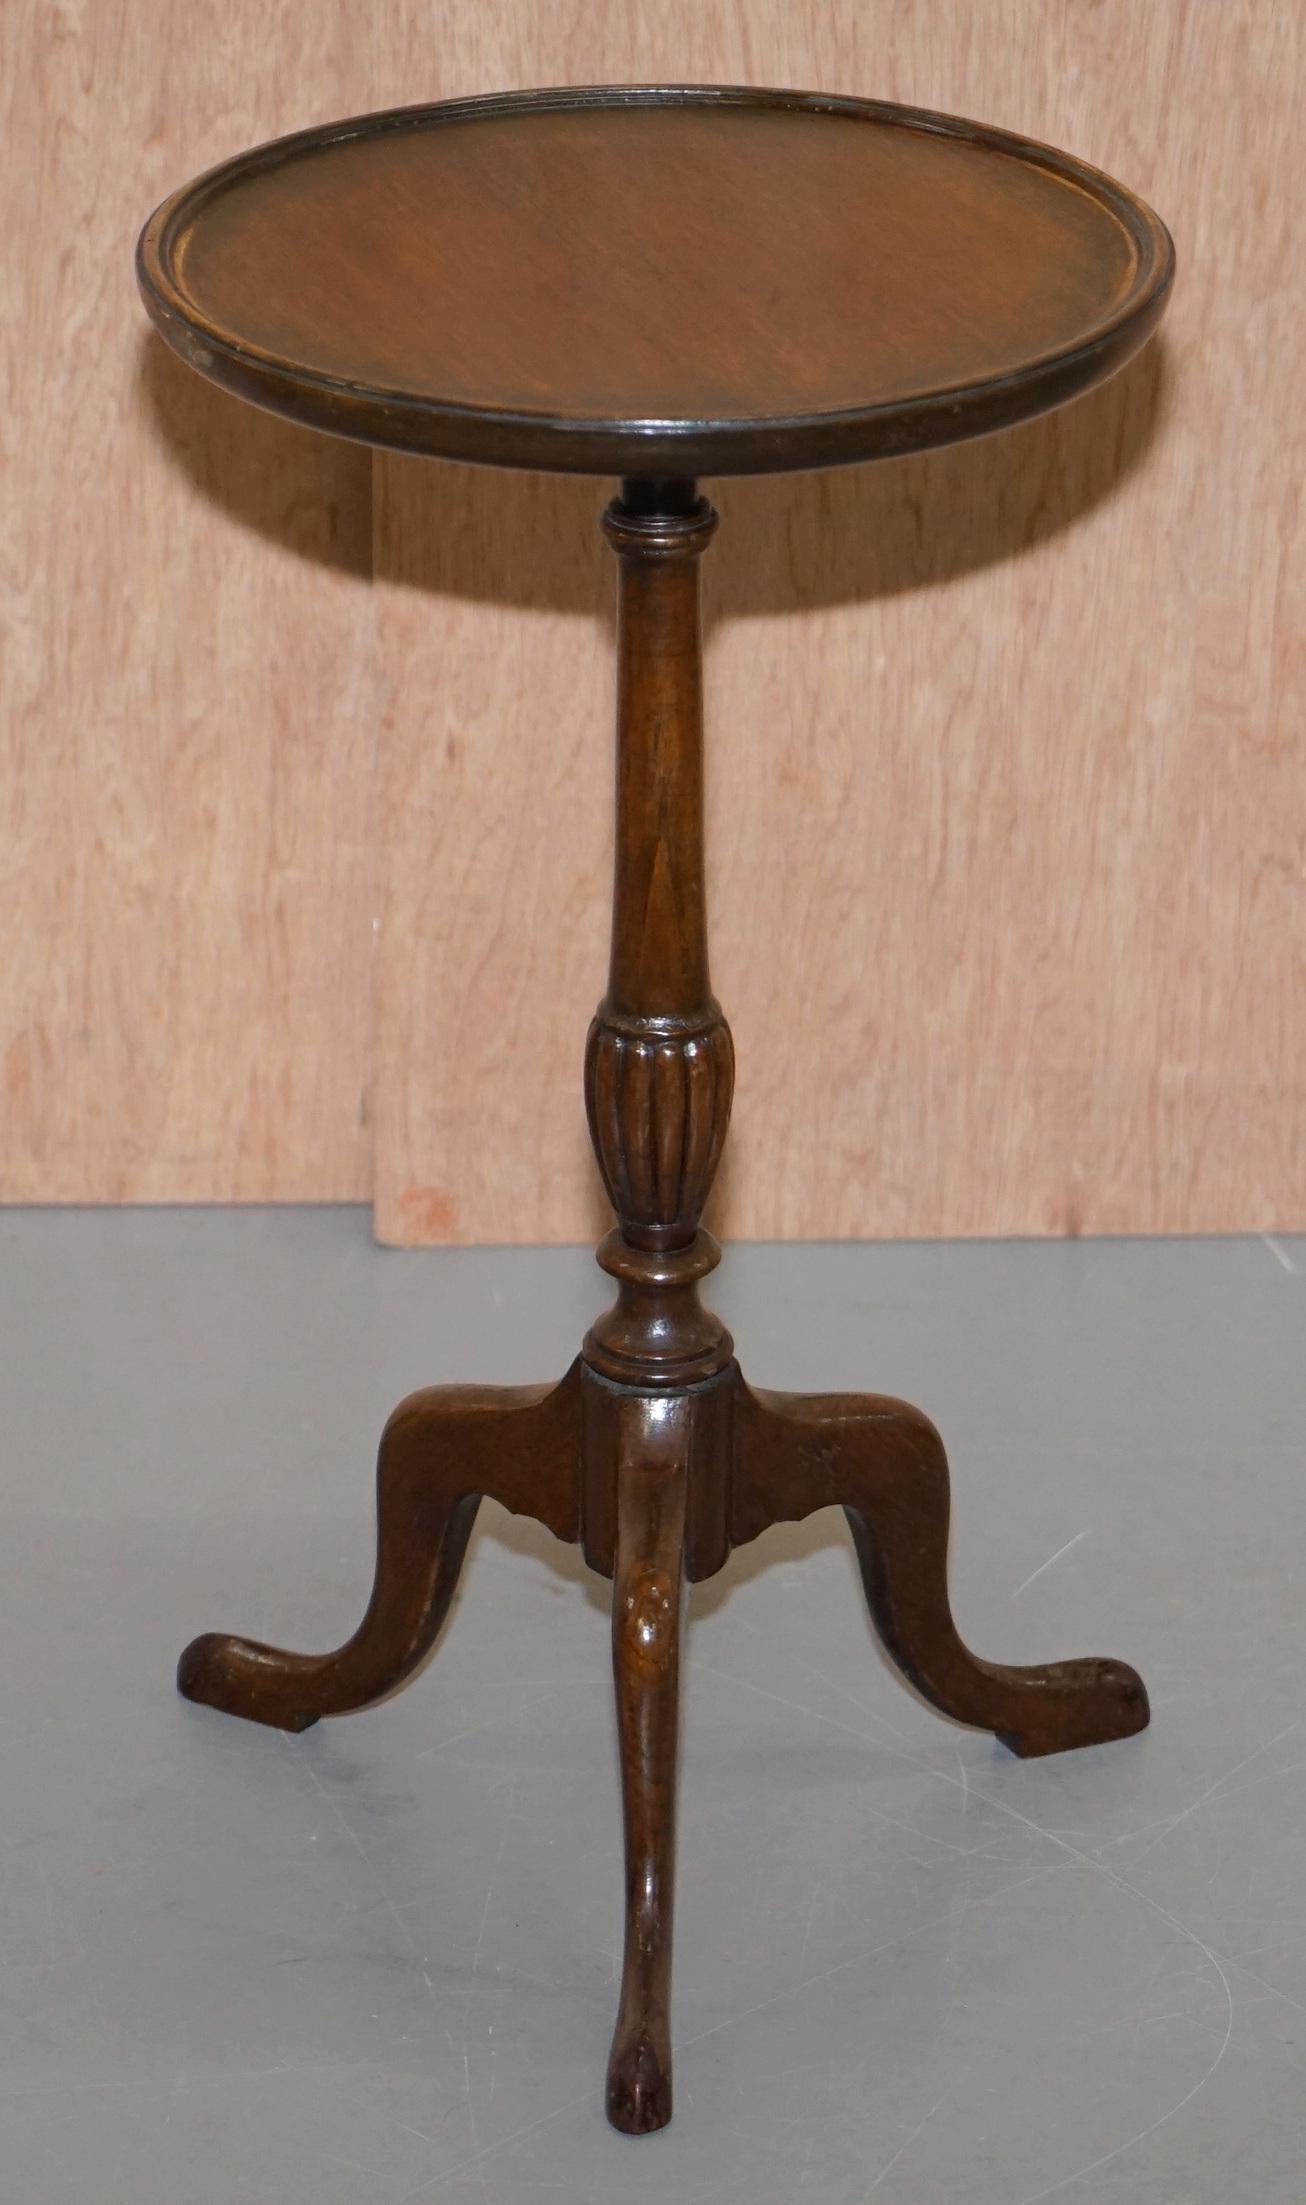 We are delighted to offer for sale this lovely pair of vintage light Mahogany lamp or side tables with nicely turned column base

A good looking well made tripod pair in good condition throughout, we have cleaned waxed and polished them from top